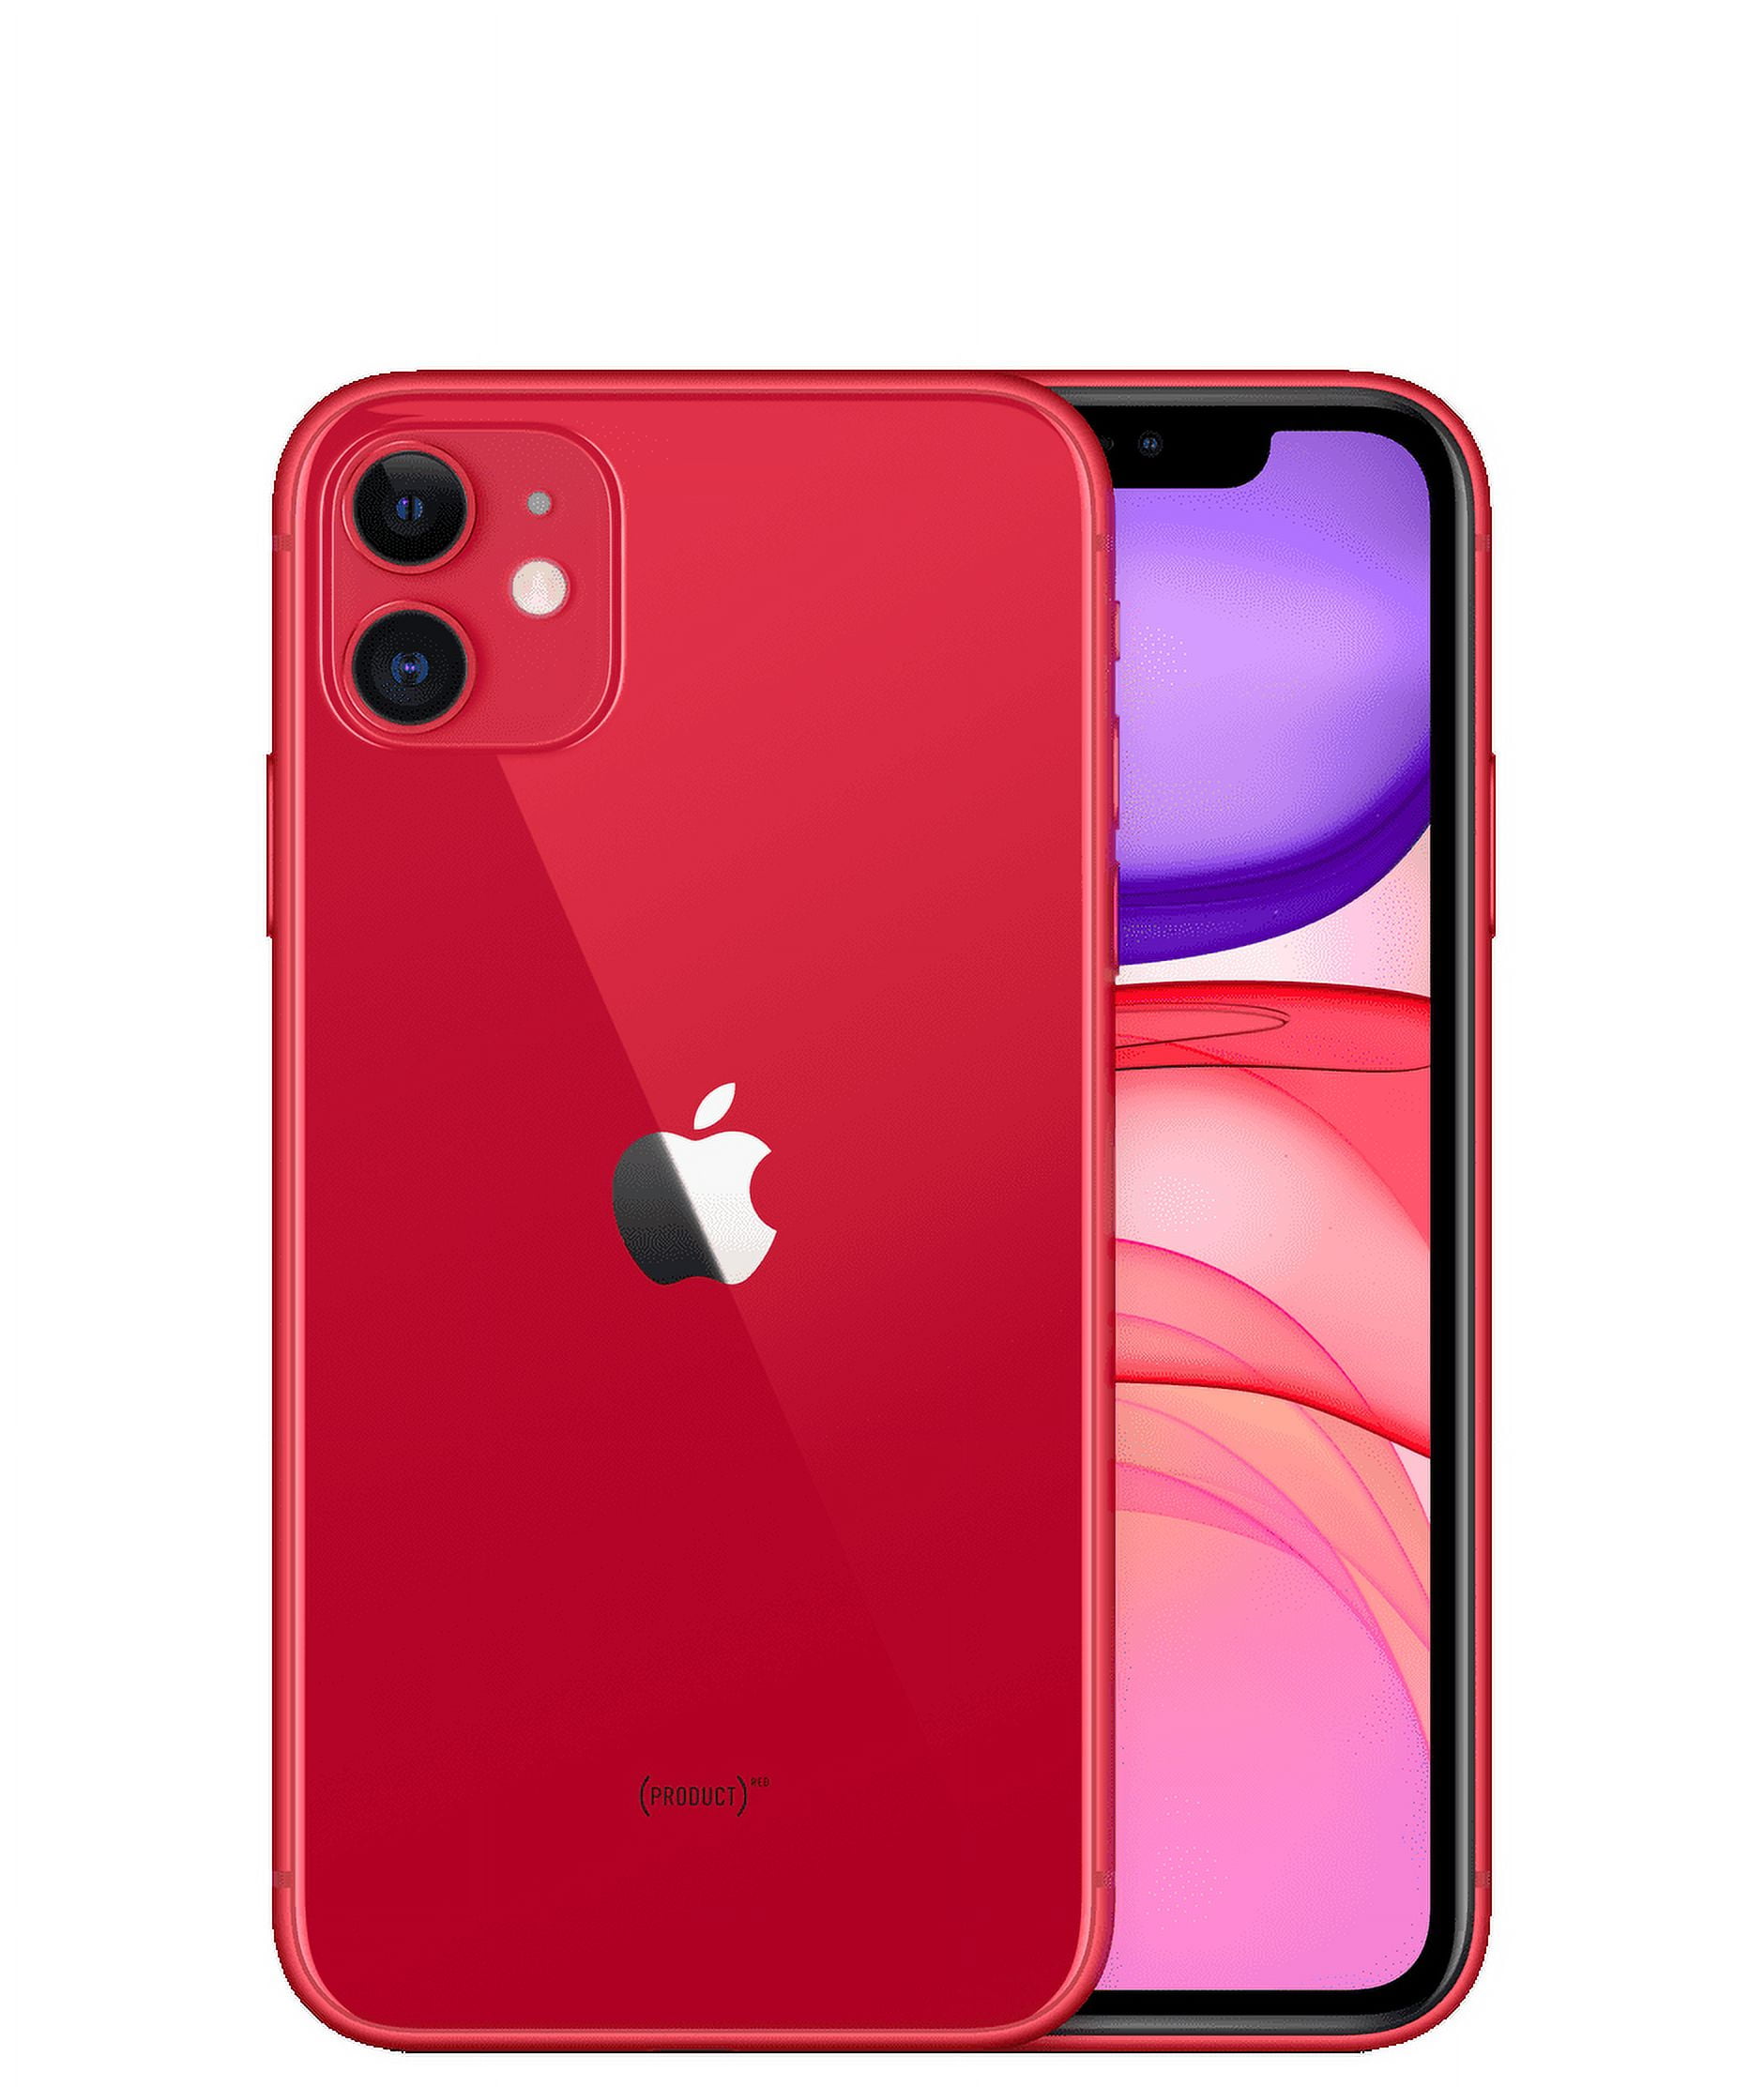 iPhone11 red